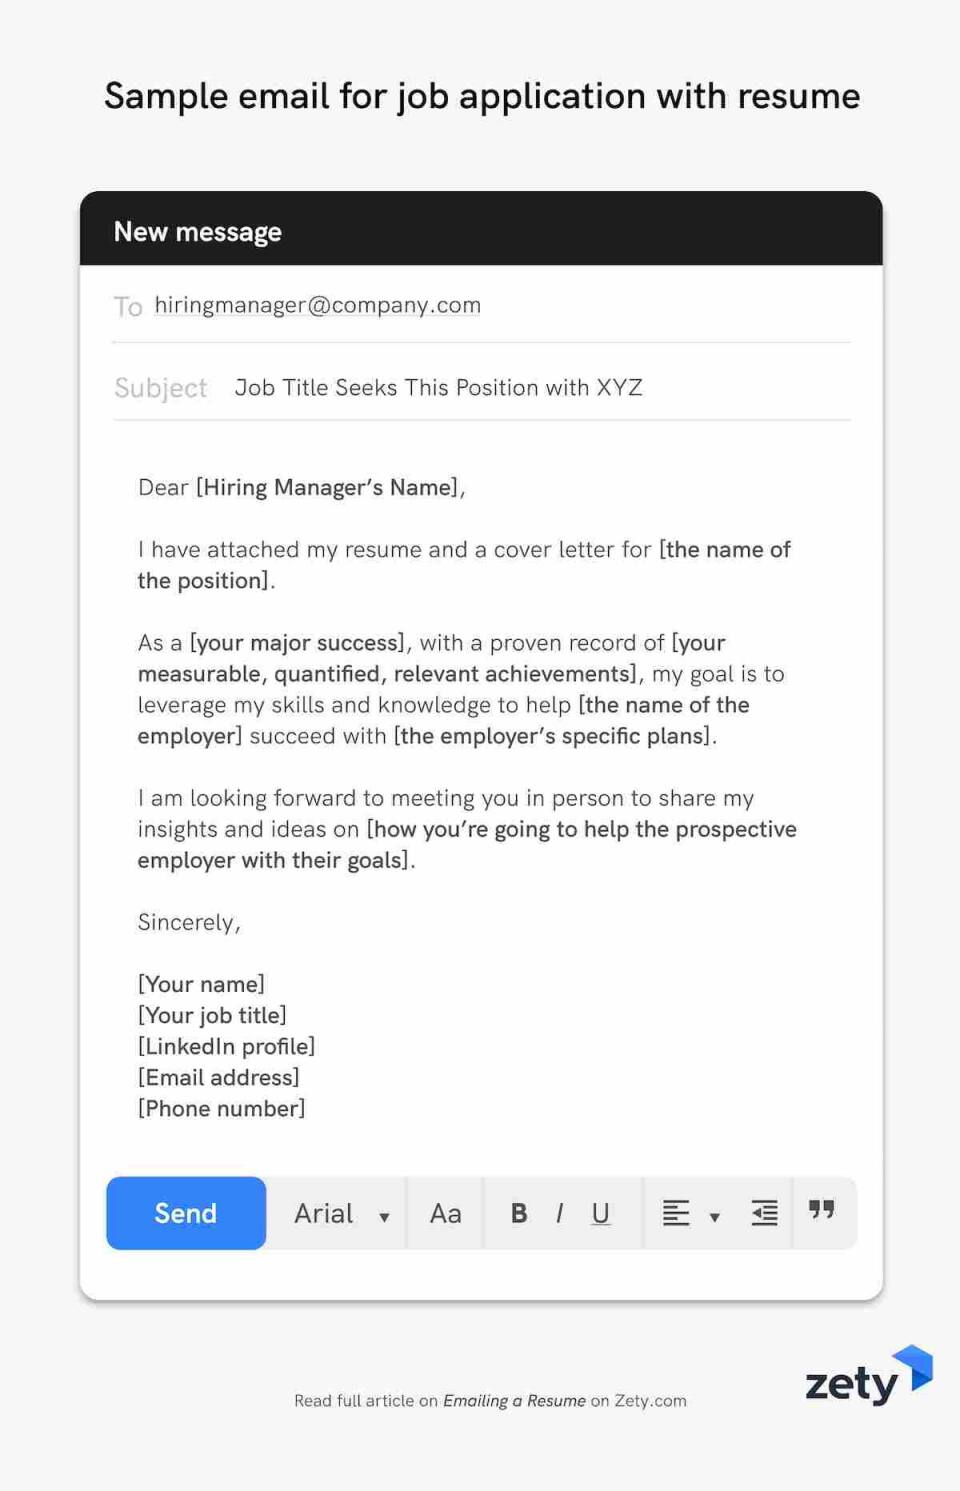 Sample Letter To Potential Employer from cdn-images.zety.com